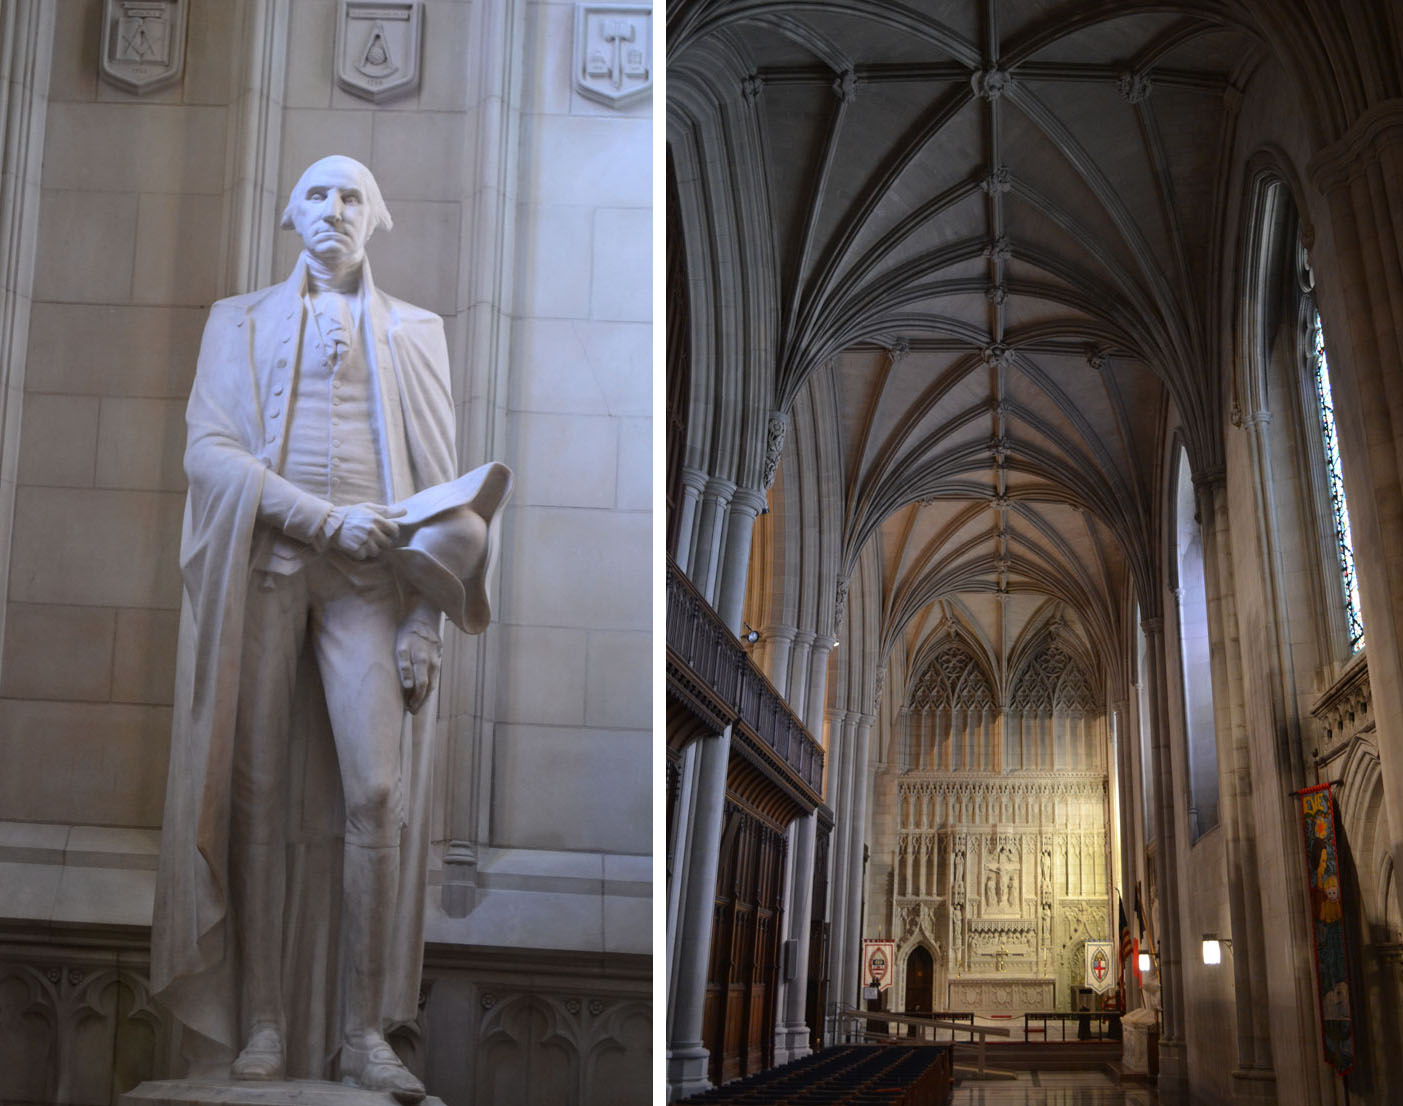 (LEFT) Marble statue of George Washington by Lee Lawrie at Washington National Cathedral, Washington, D.C.